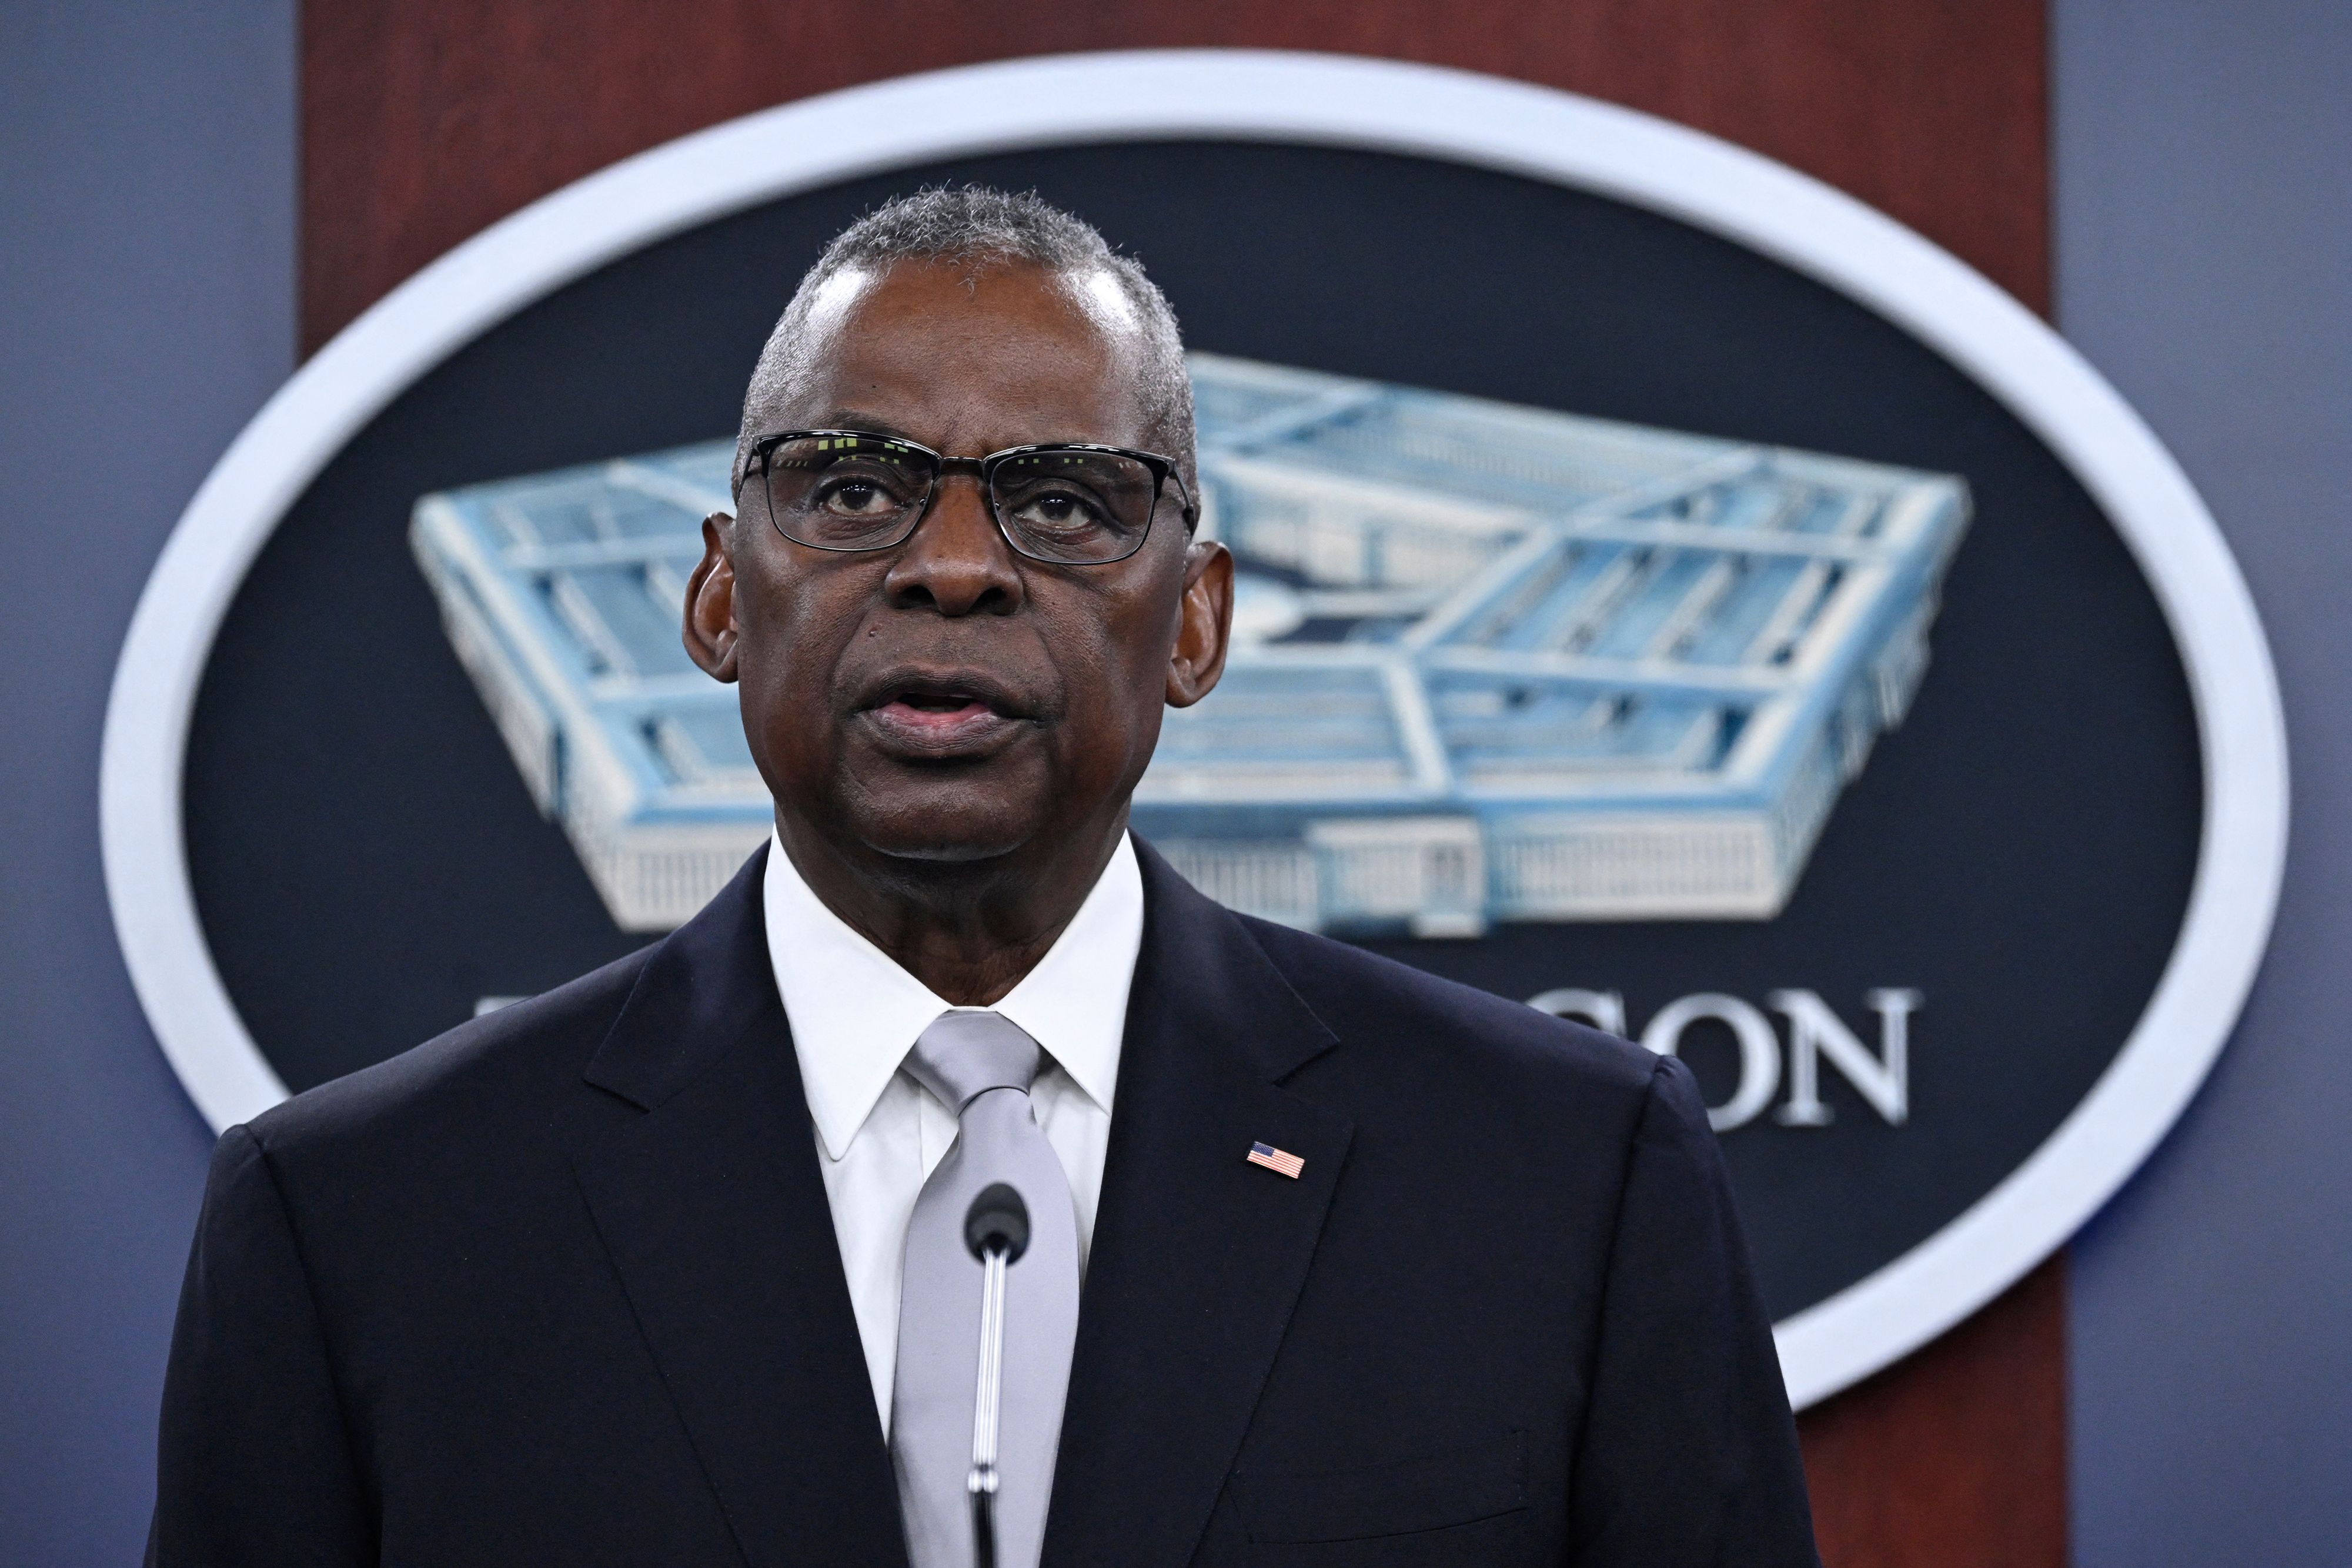 US Secretary of Defense Lloyd Austin speaks during a press conference in Washington, DC, on February 1.